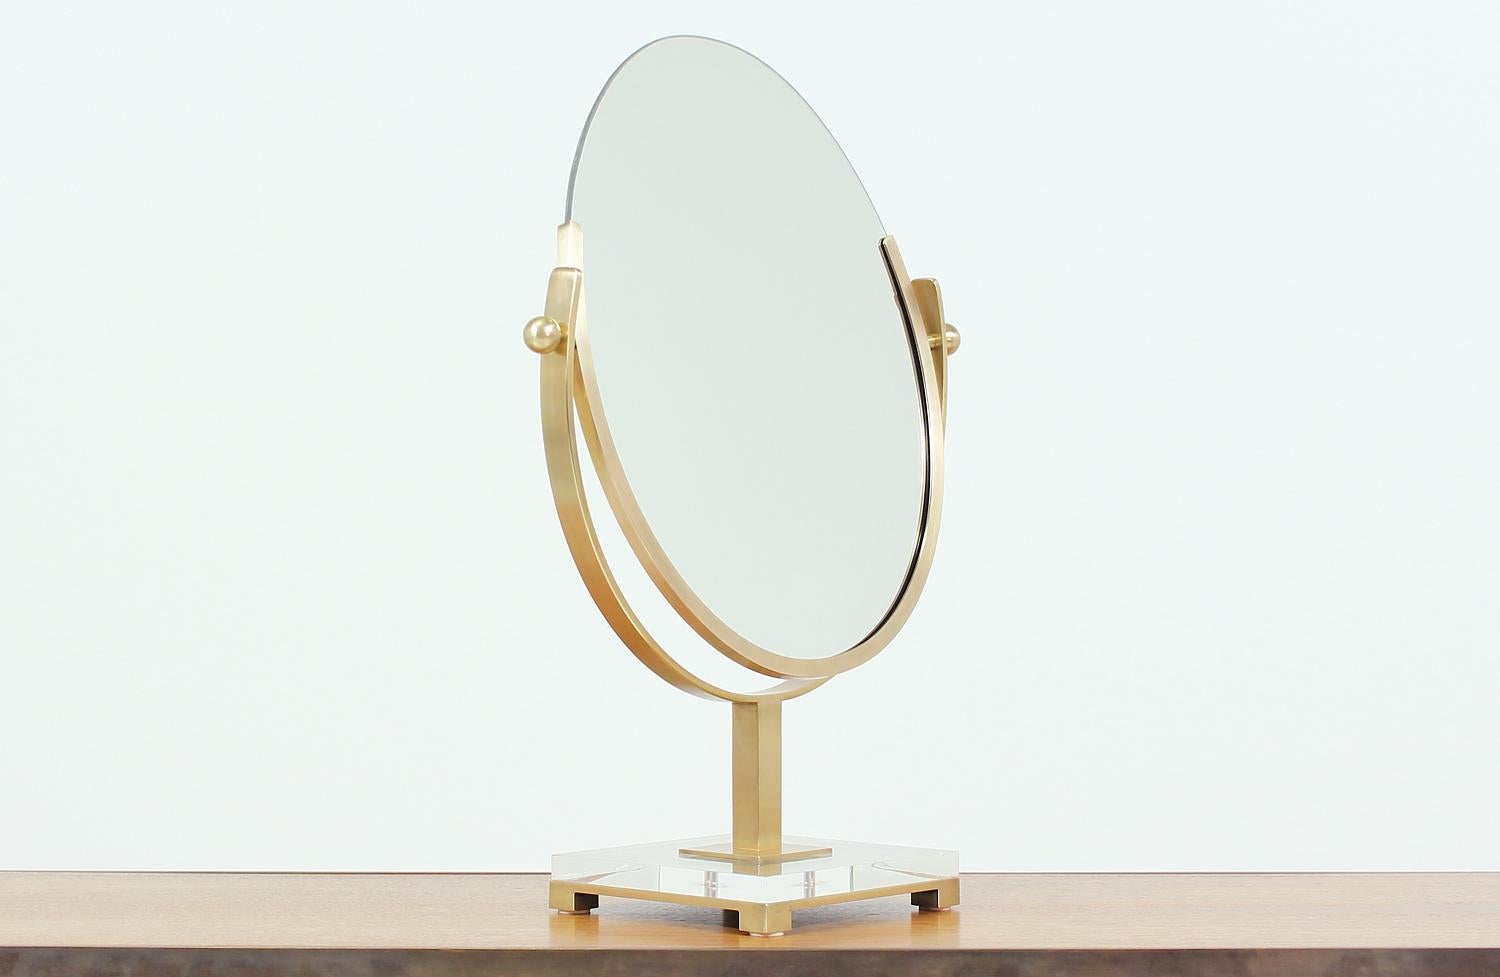 Dazzling brass mirror designed by Charles Hollis Jones in the United States circa 1970s. This beautiful double-sided oval mirror maintains all its original components, including the lucite base, brass hardware and both mirrors. The brass has been